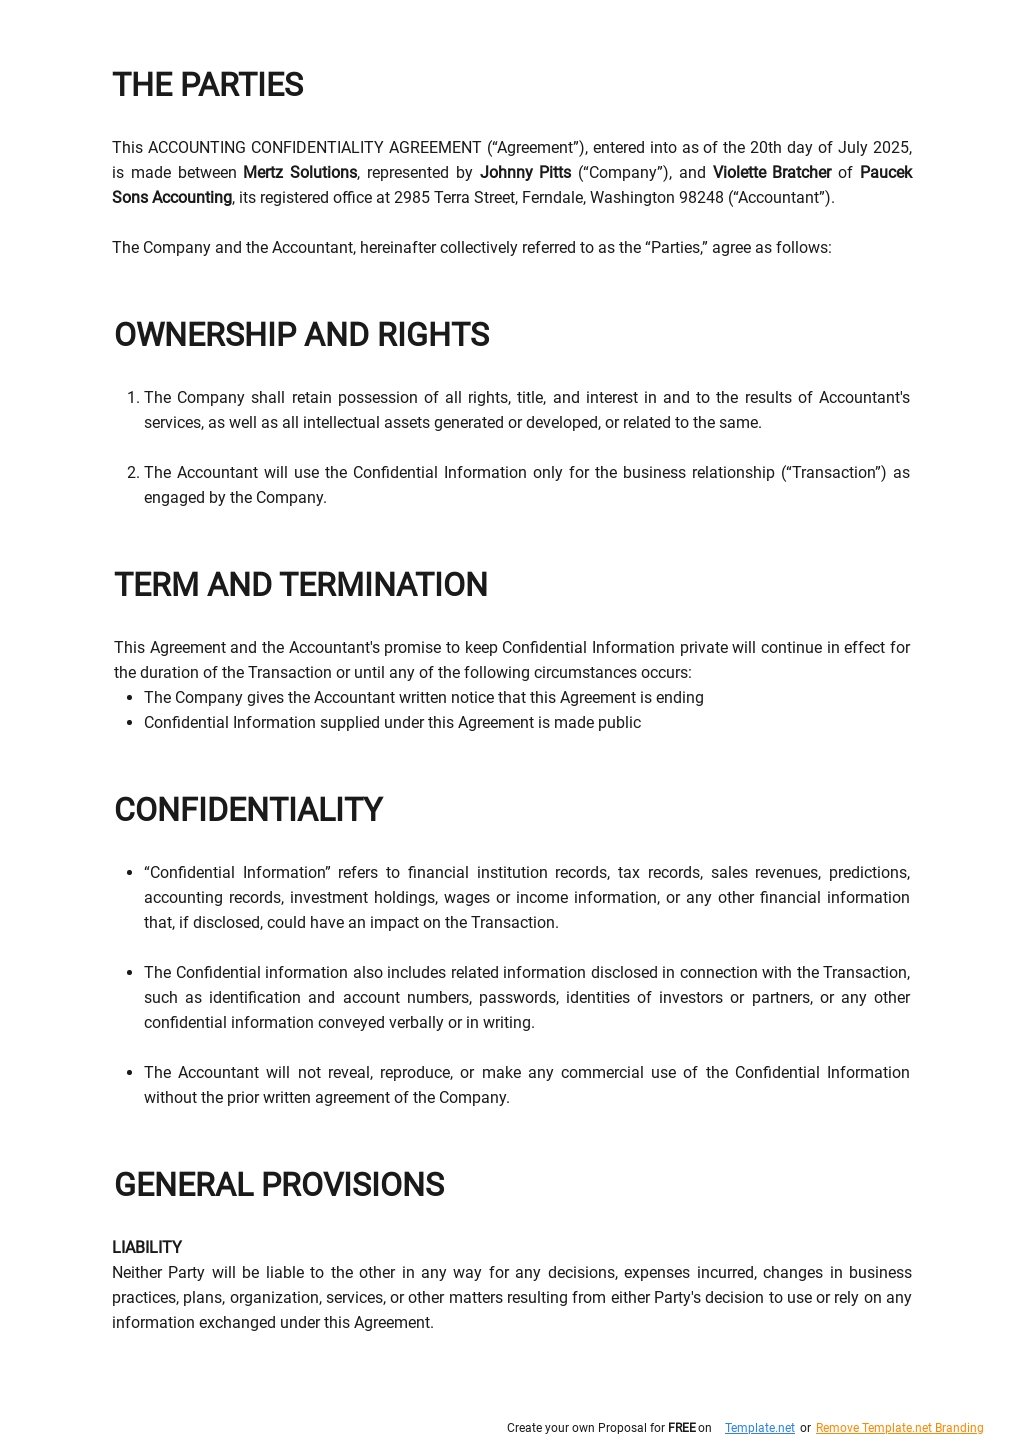 Accounting Confidentiality Agreement Template 1.jpe